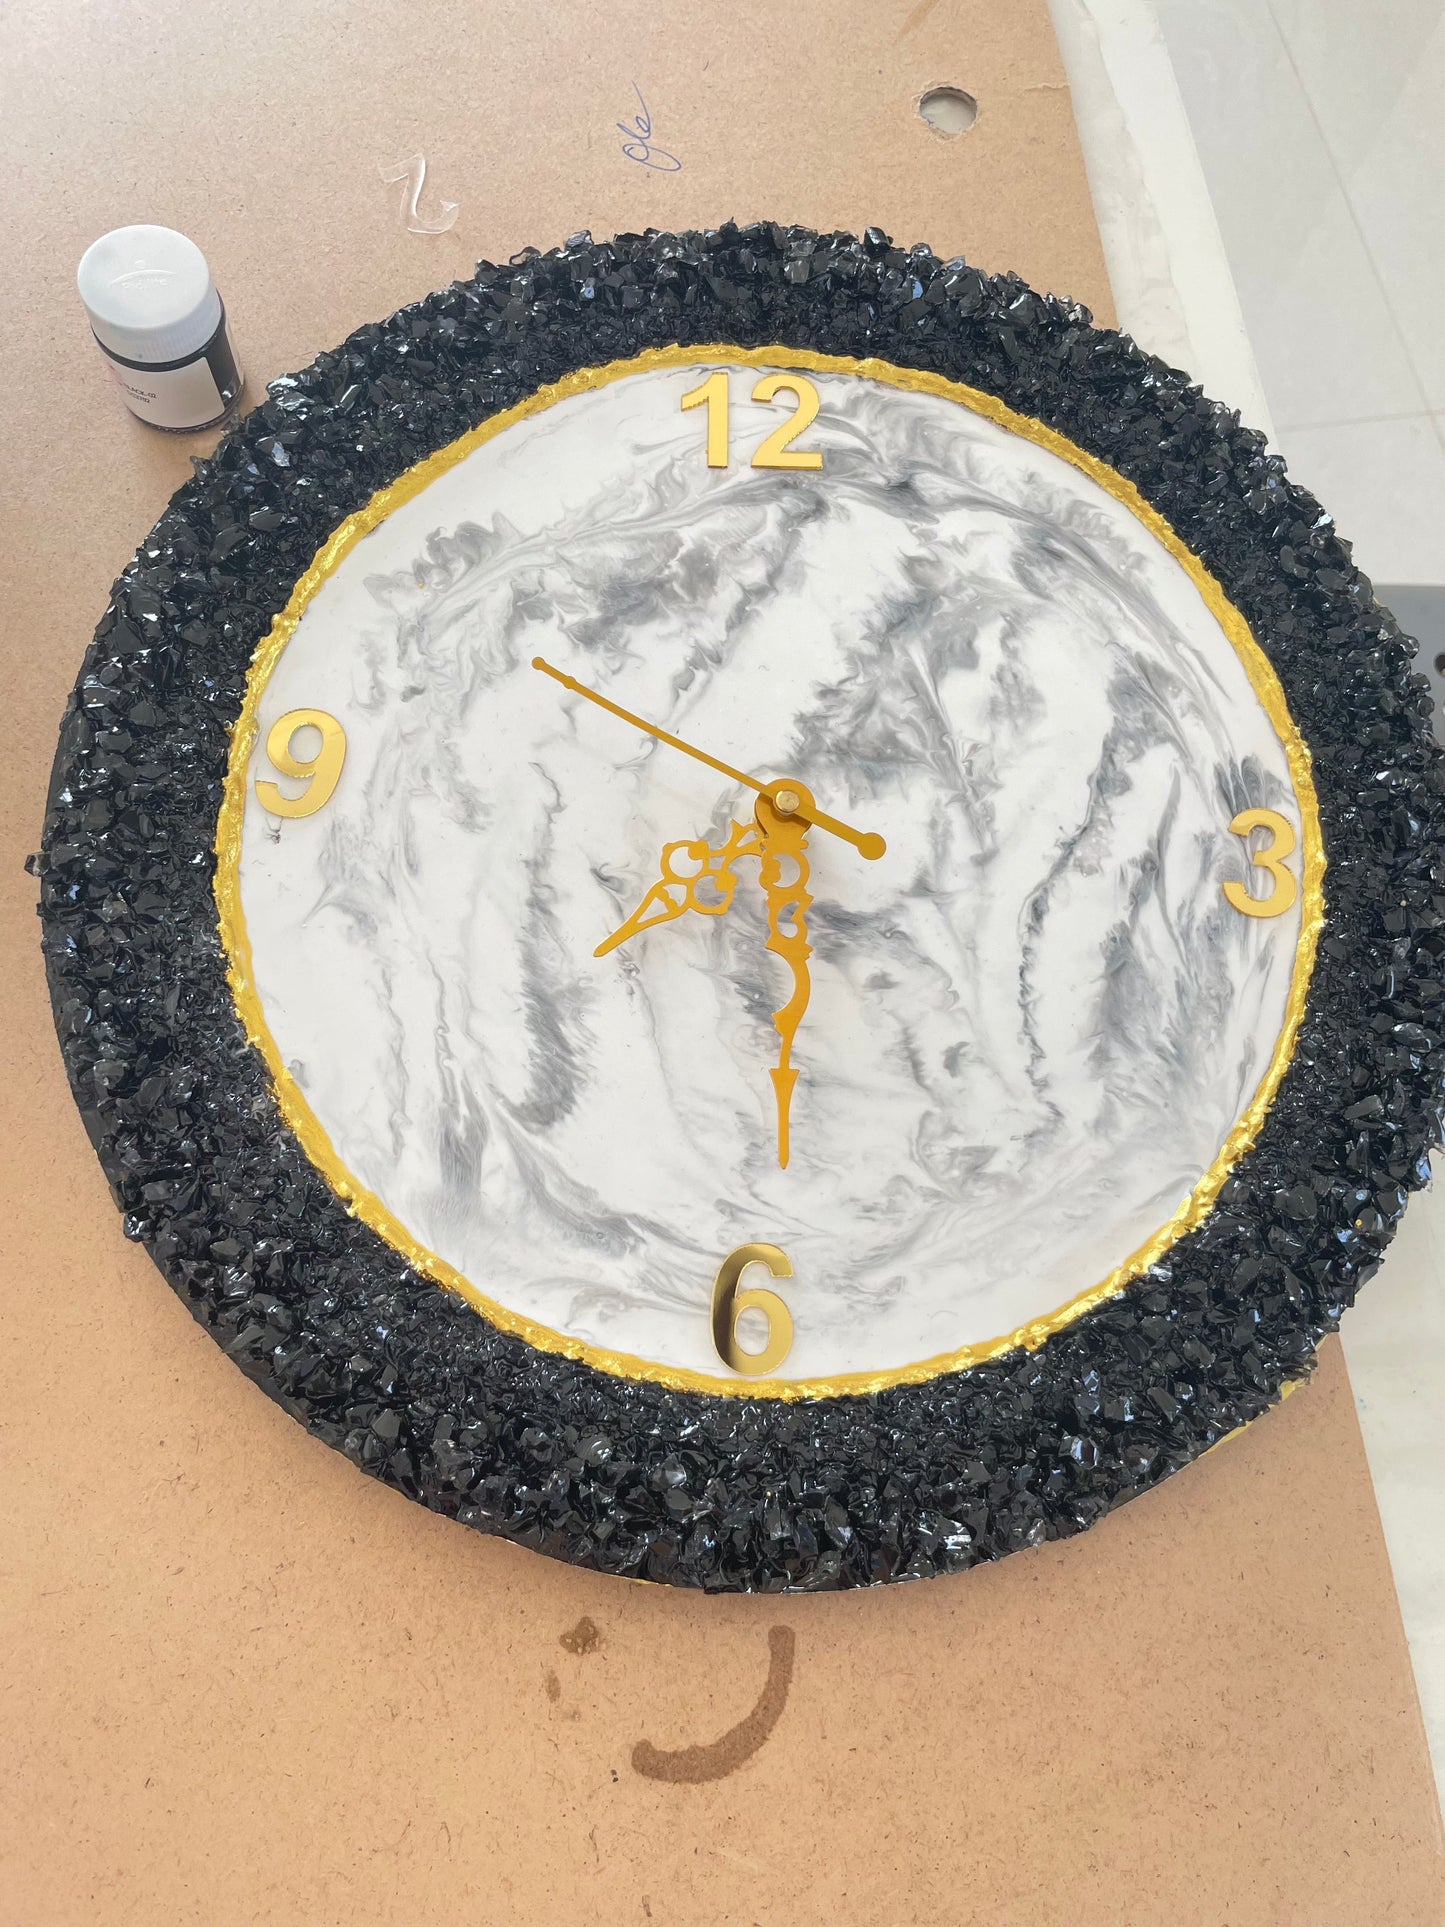 12 inch Epoxy Resin Clock Workshop | Saturday 2nd March or Sunday 3rd March